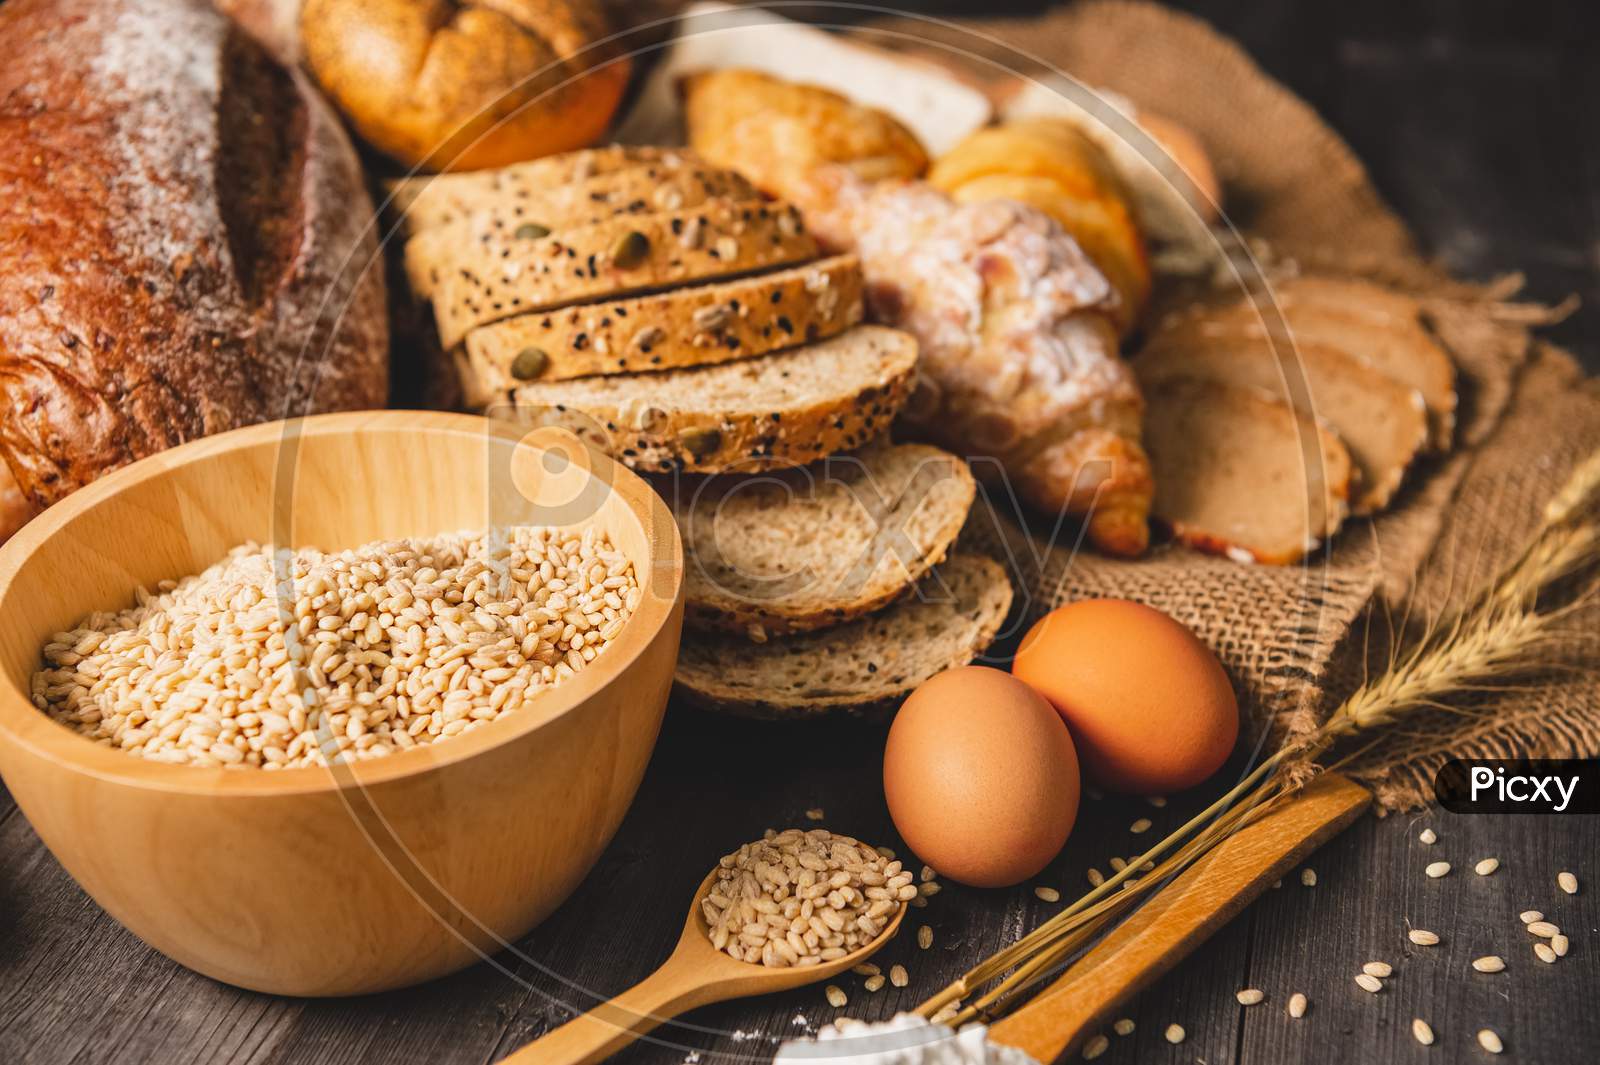 Different Kinds Of Bread With Nutrition Whole Grains On Wooden Background. Food And Bakery In Kitchen Concept. Delicious Breakfast Gouemet And Meal.